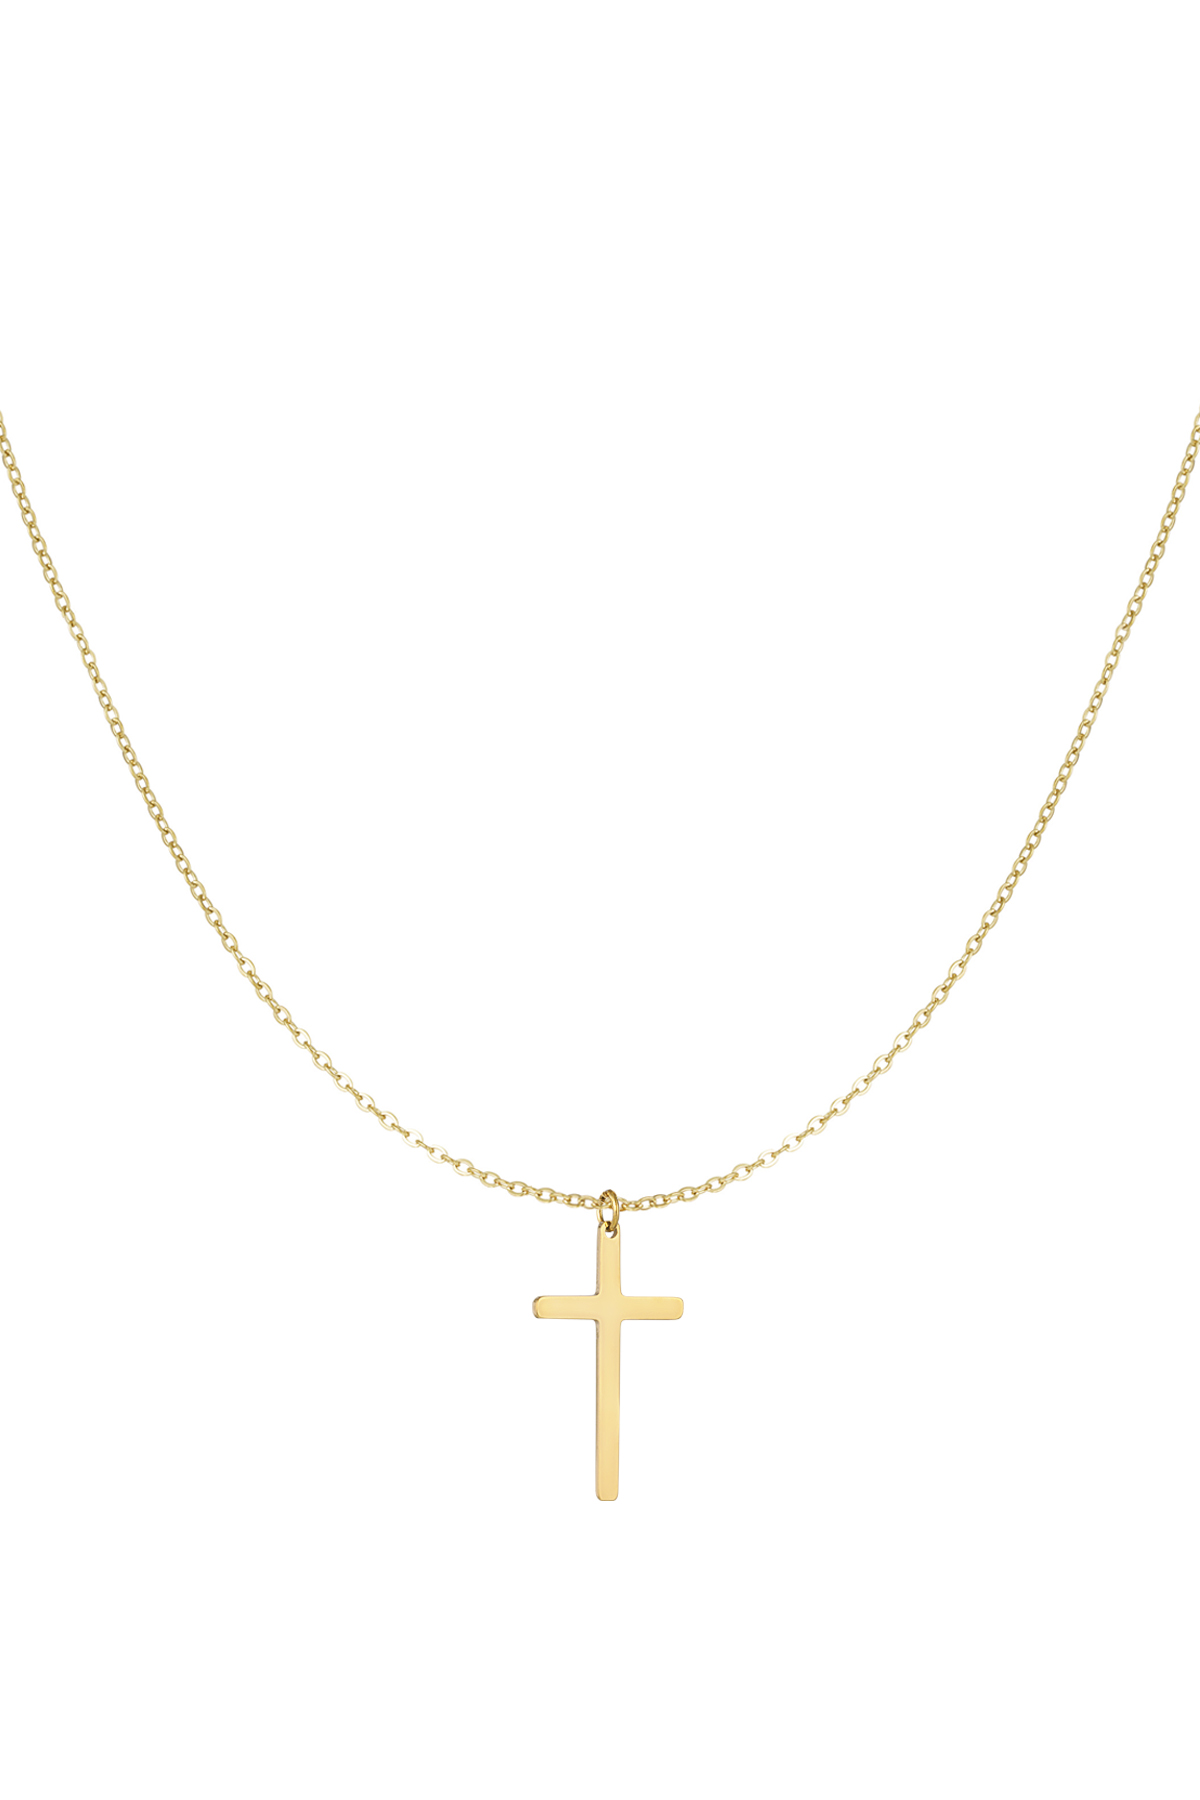 Necklace cross charm - gold h5 